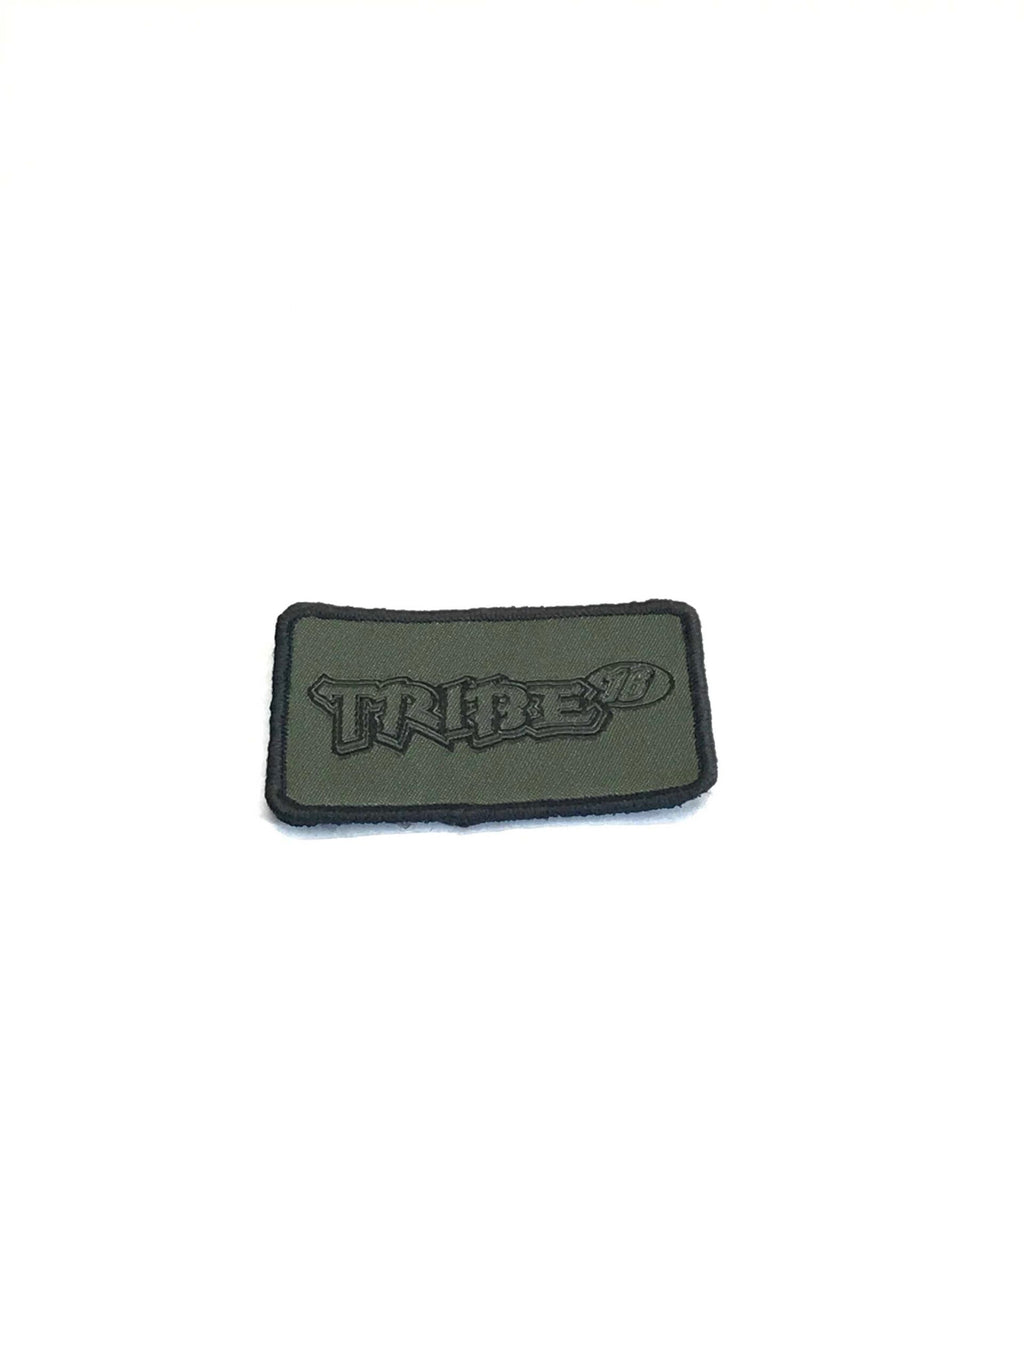 Tribe16 Morale Patch - Olive Drab